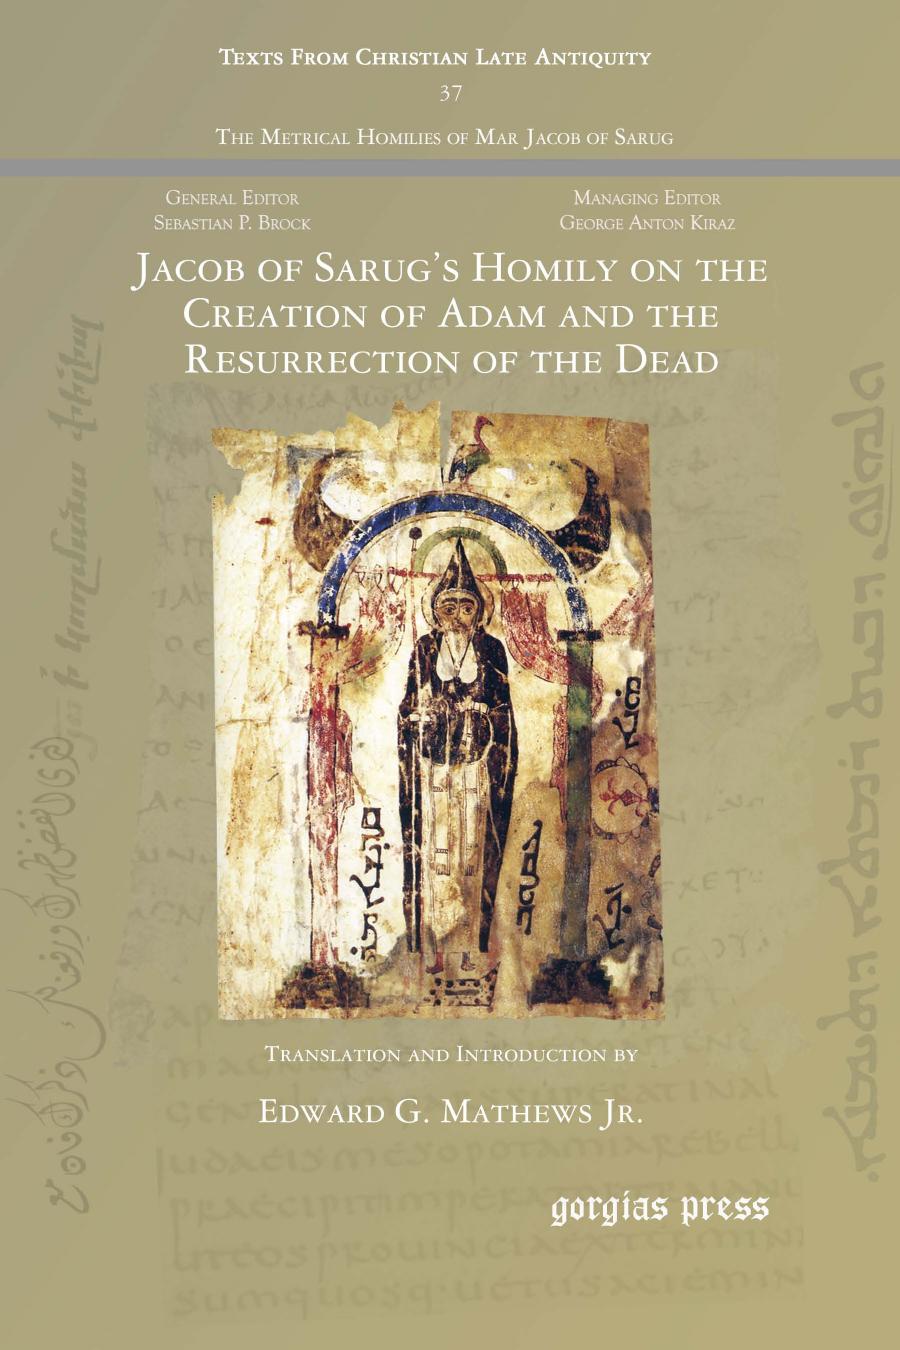 Jacob of Sarug's Homily on the Creation of Adam and the Resurrection of the Dead by Edward G. Mathews Jr